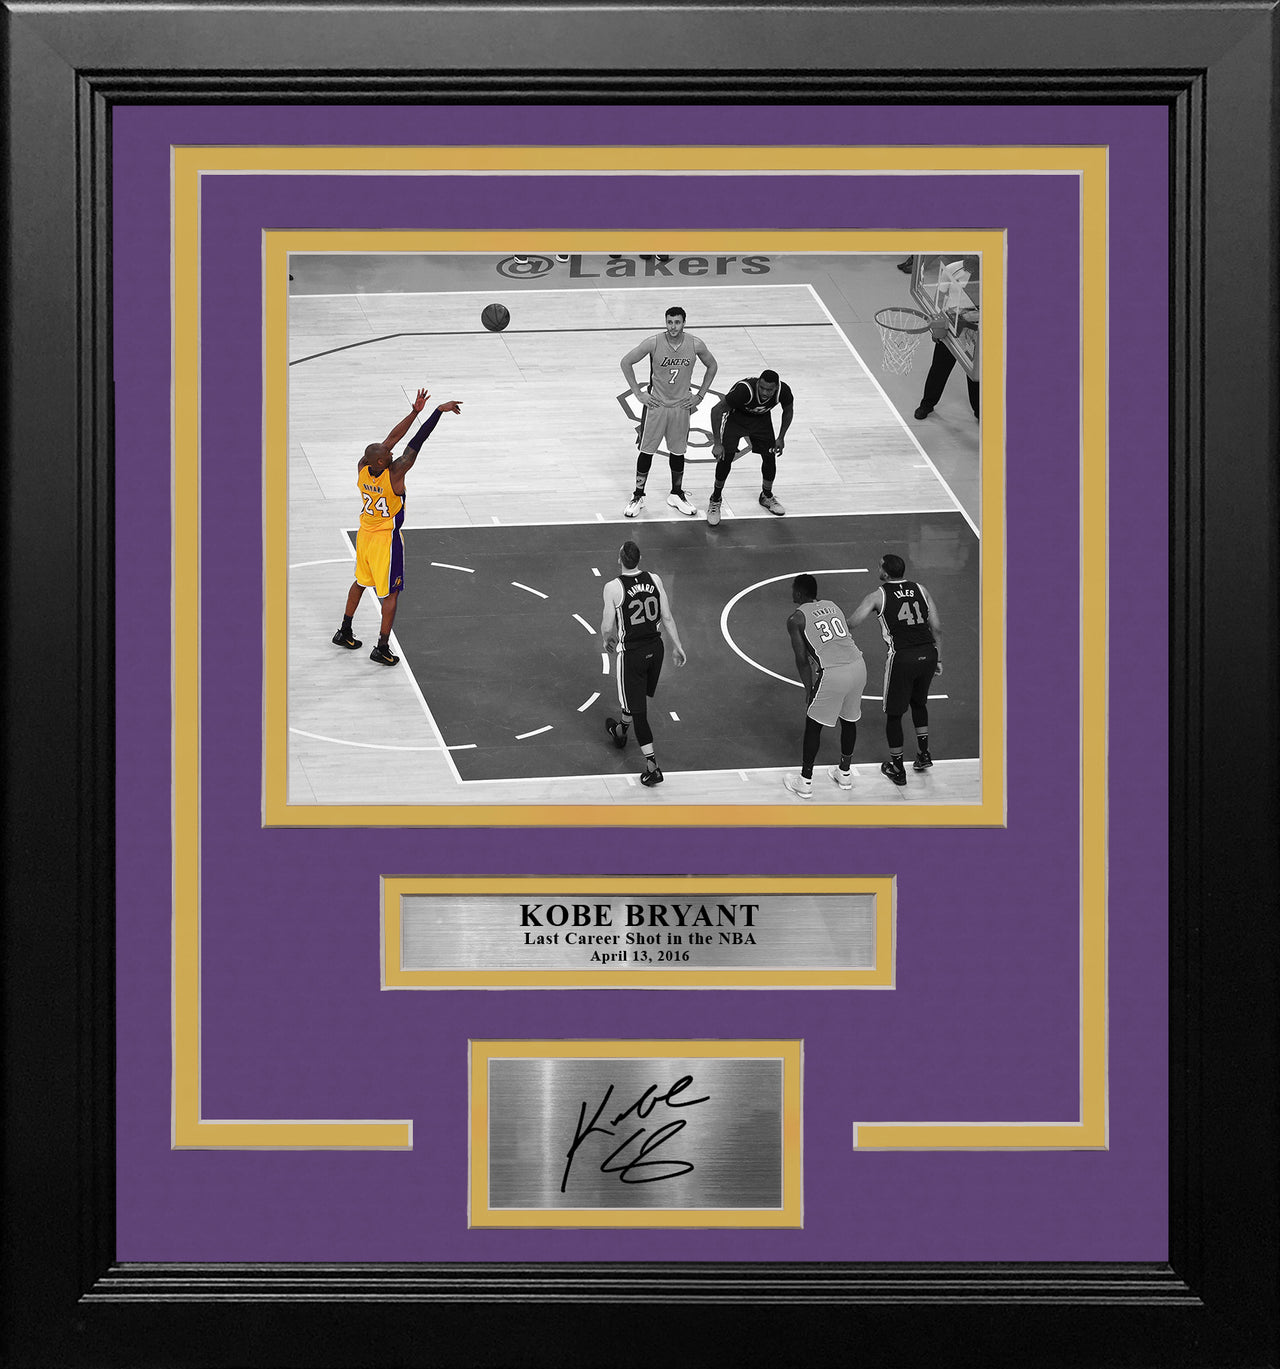 Los Angeles Lakers Basketball Poster Set of Six Vintage Jerseys- LeBron James Kobe Bryant, Shaquille O'Neal, Magic Johnson - Los Angeles Lakers